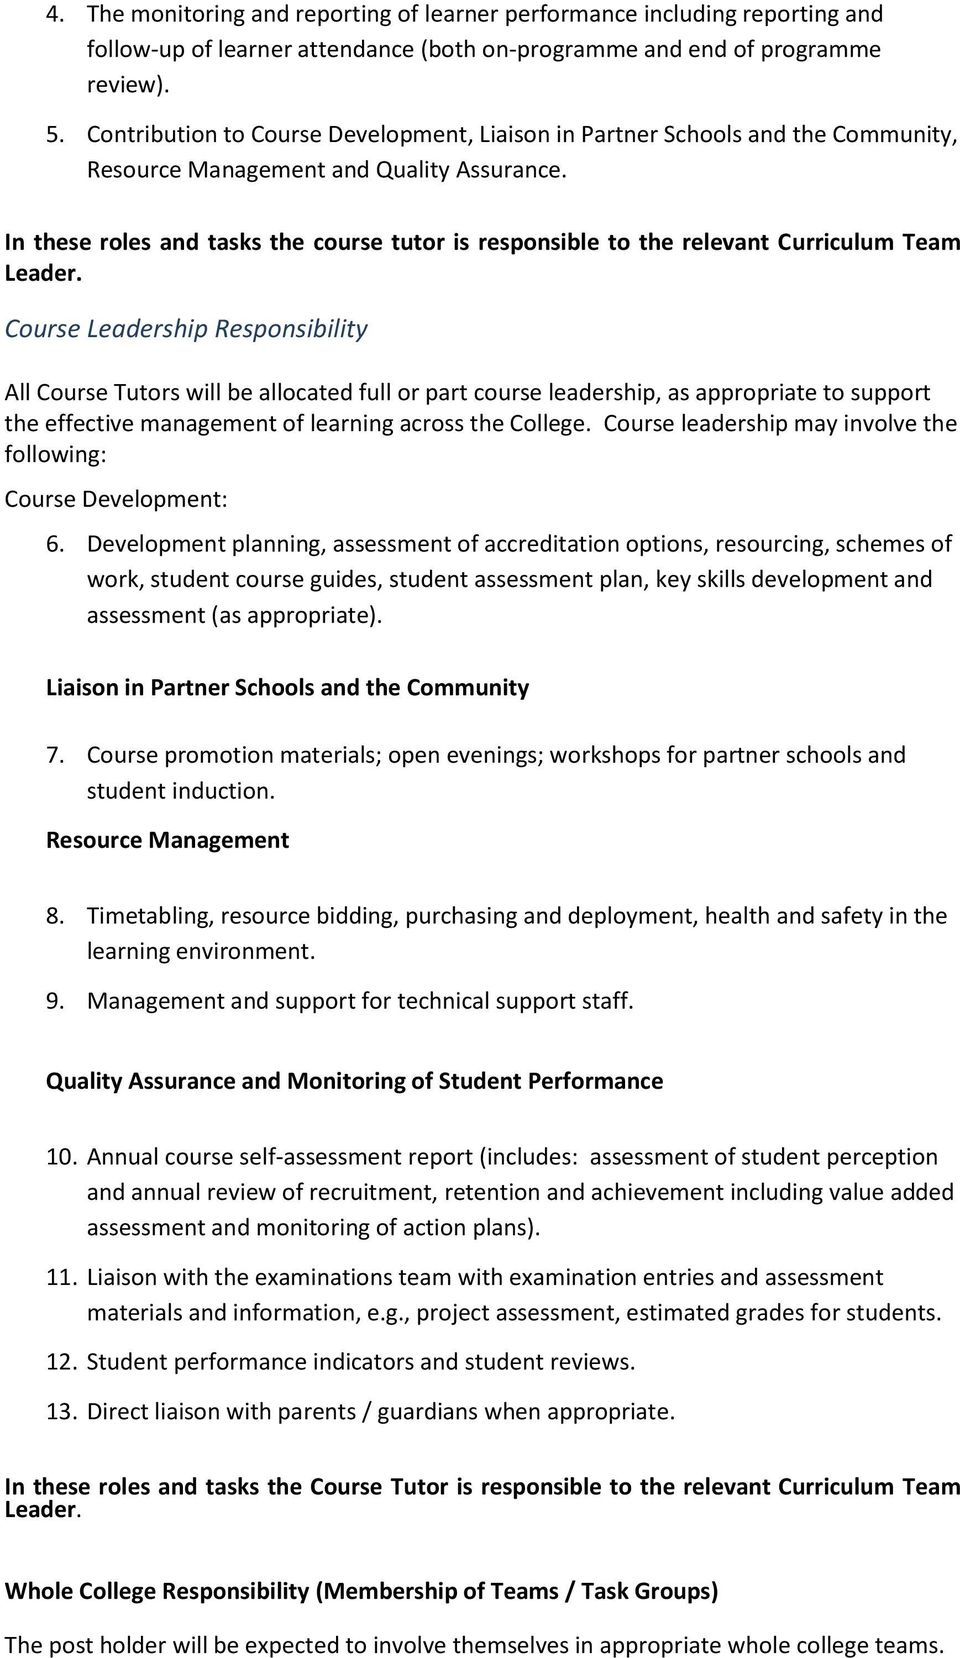 In these roles and tasks the course tutor is responsible to the relevant Curriculum Team Leader.